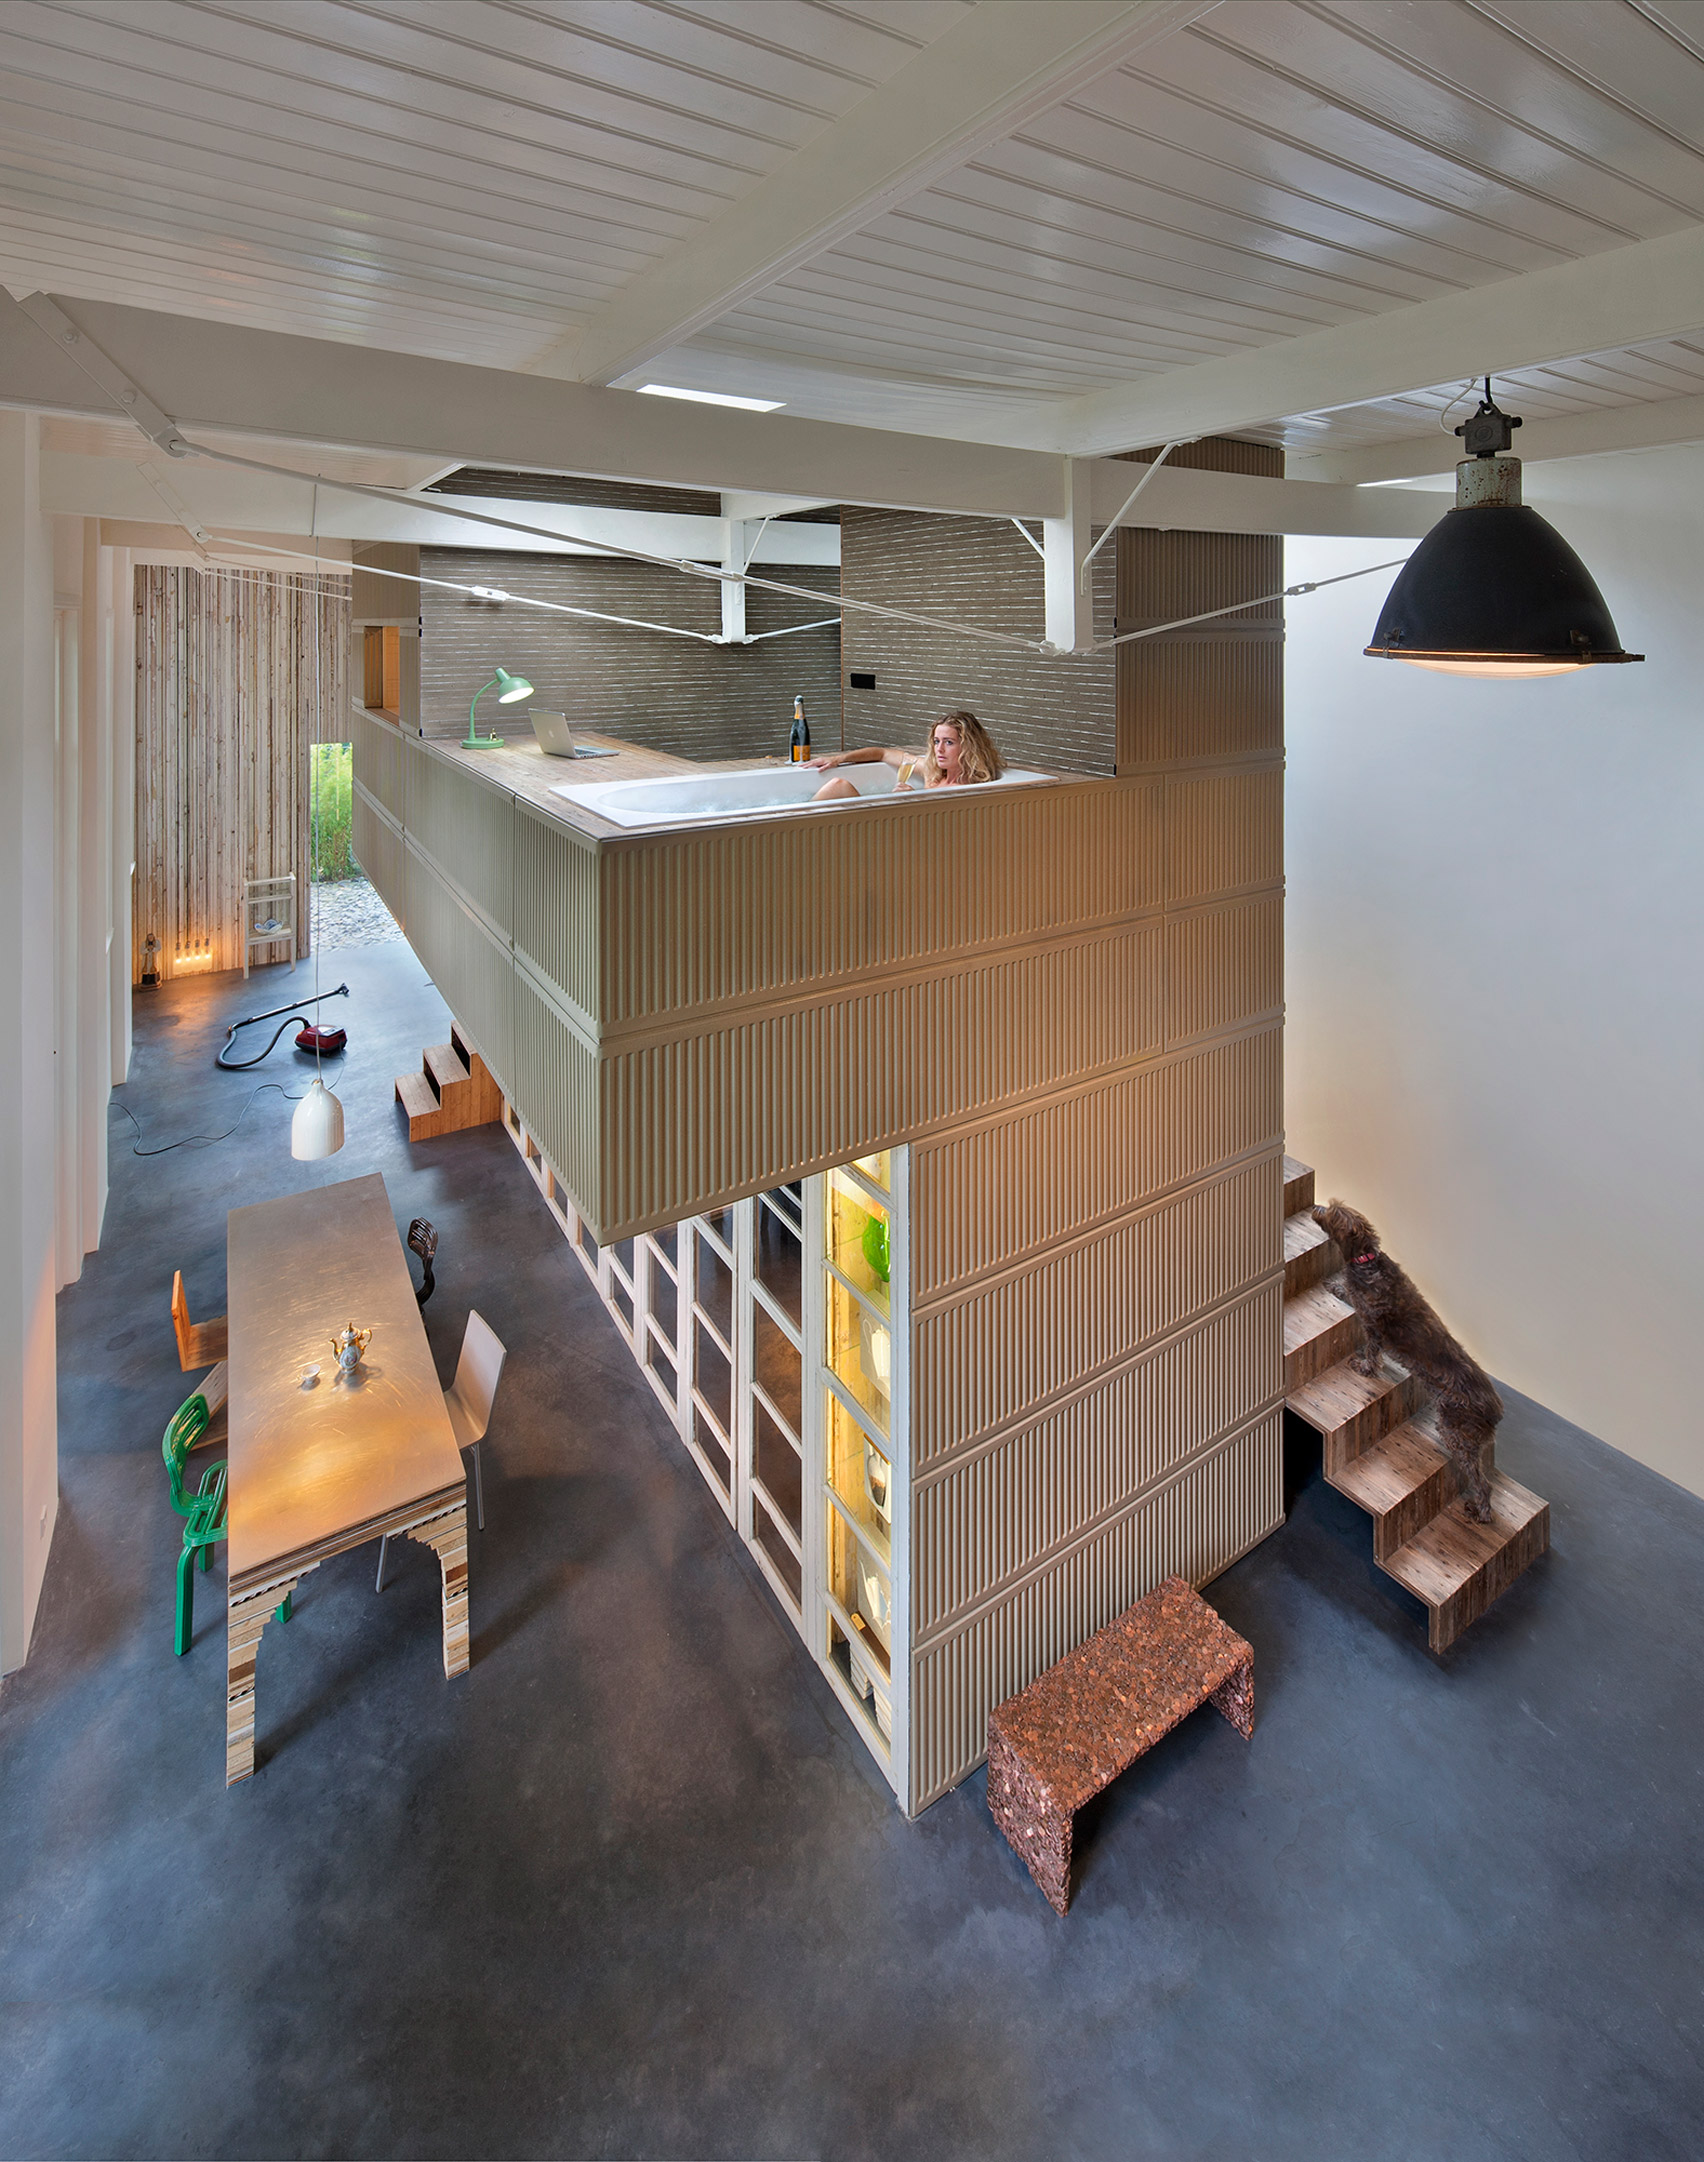 Rolf Bruggink uses salvaged materials to convert coach house into home